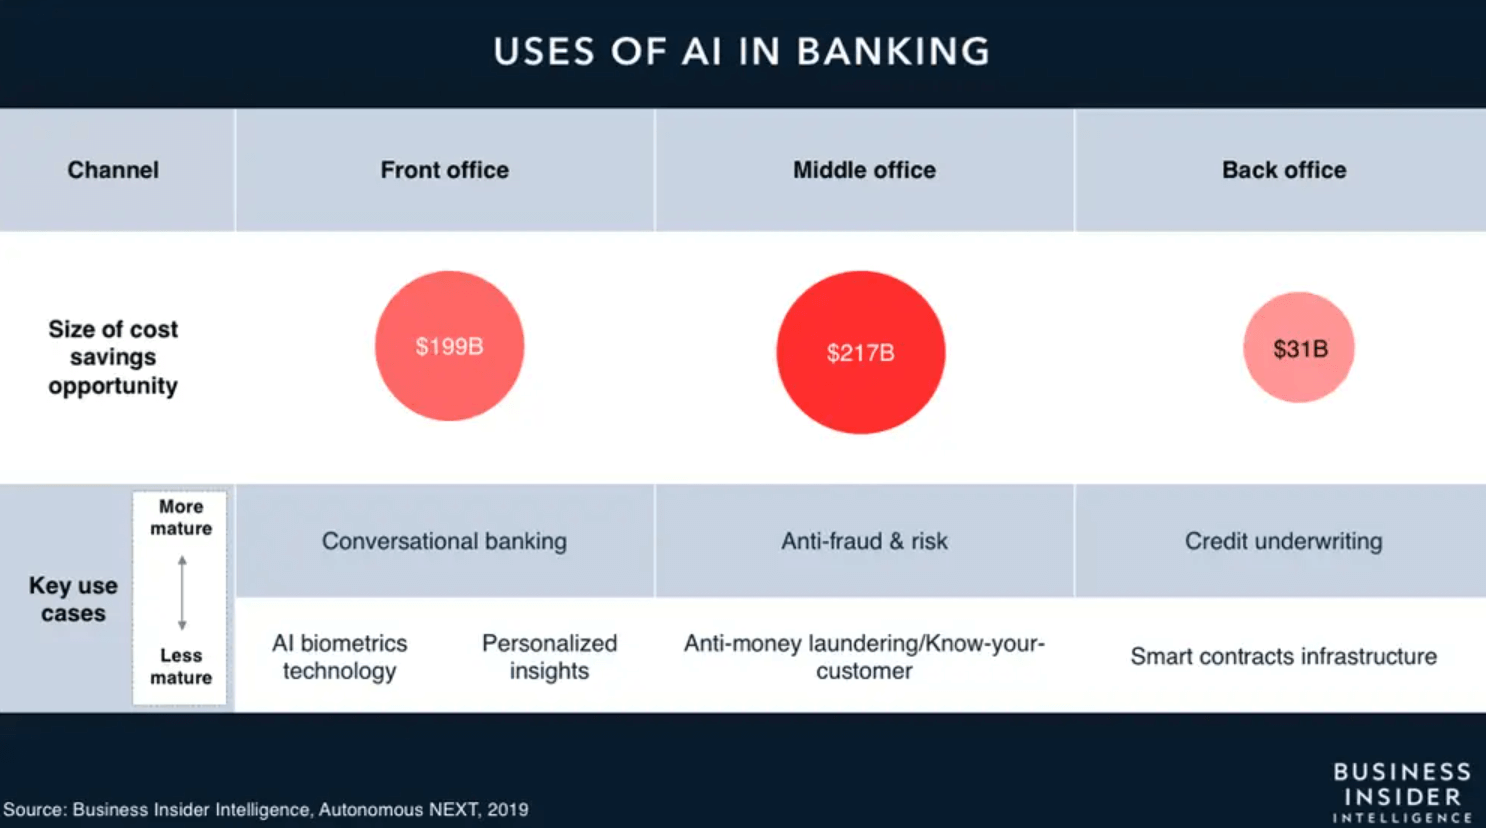 Machine Learning in Banking: Top Use Cases